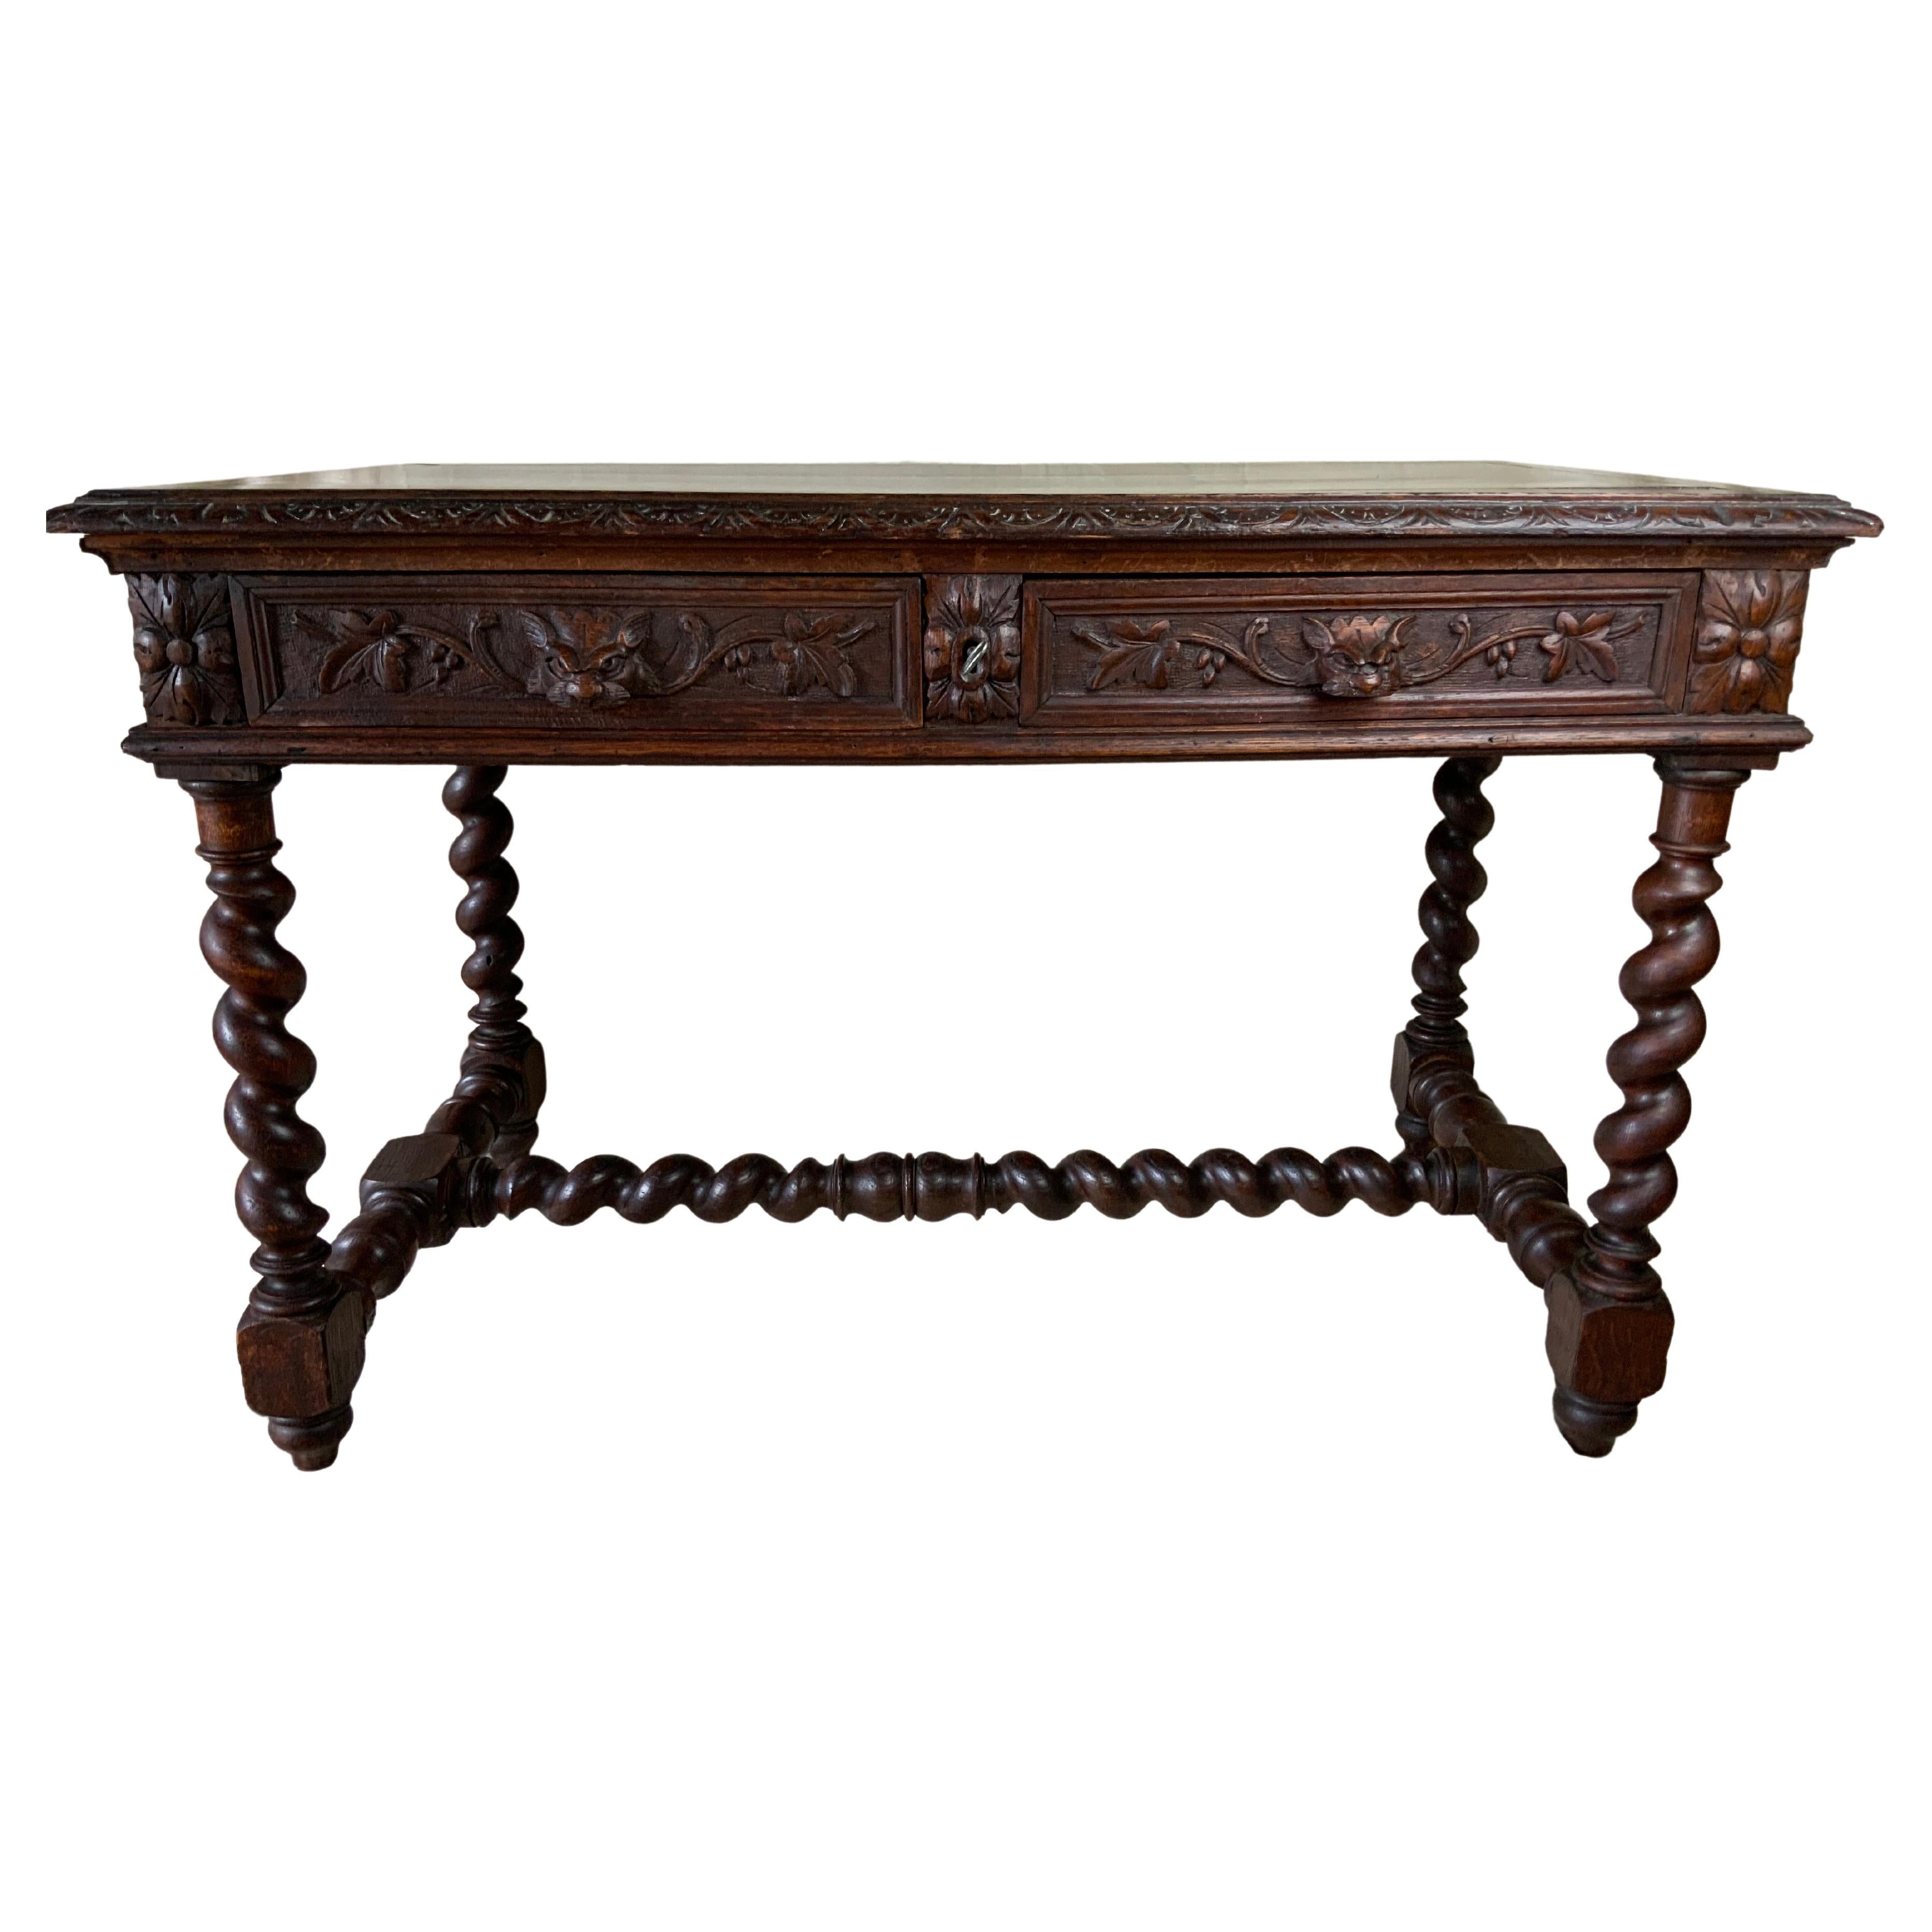 Renaissance Revival French Writing Table